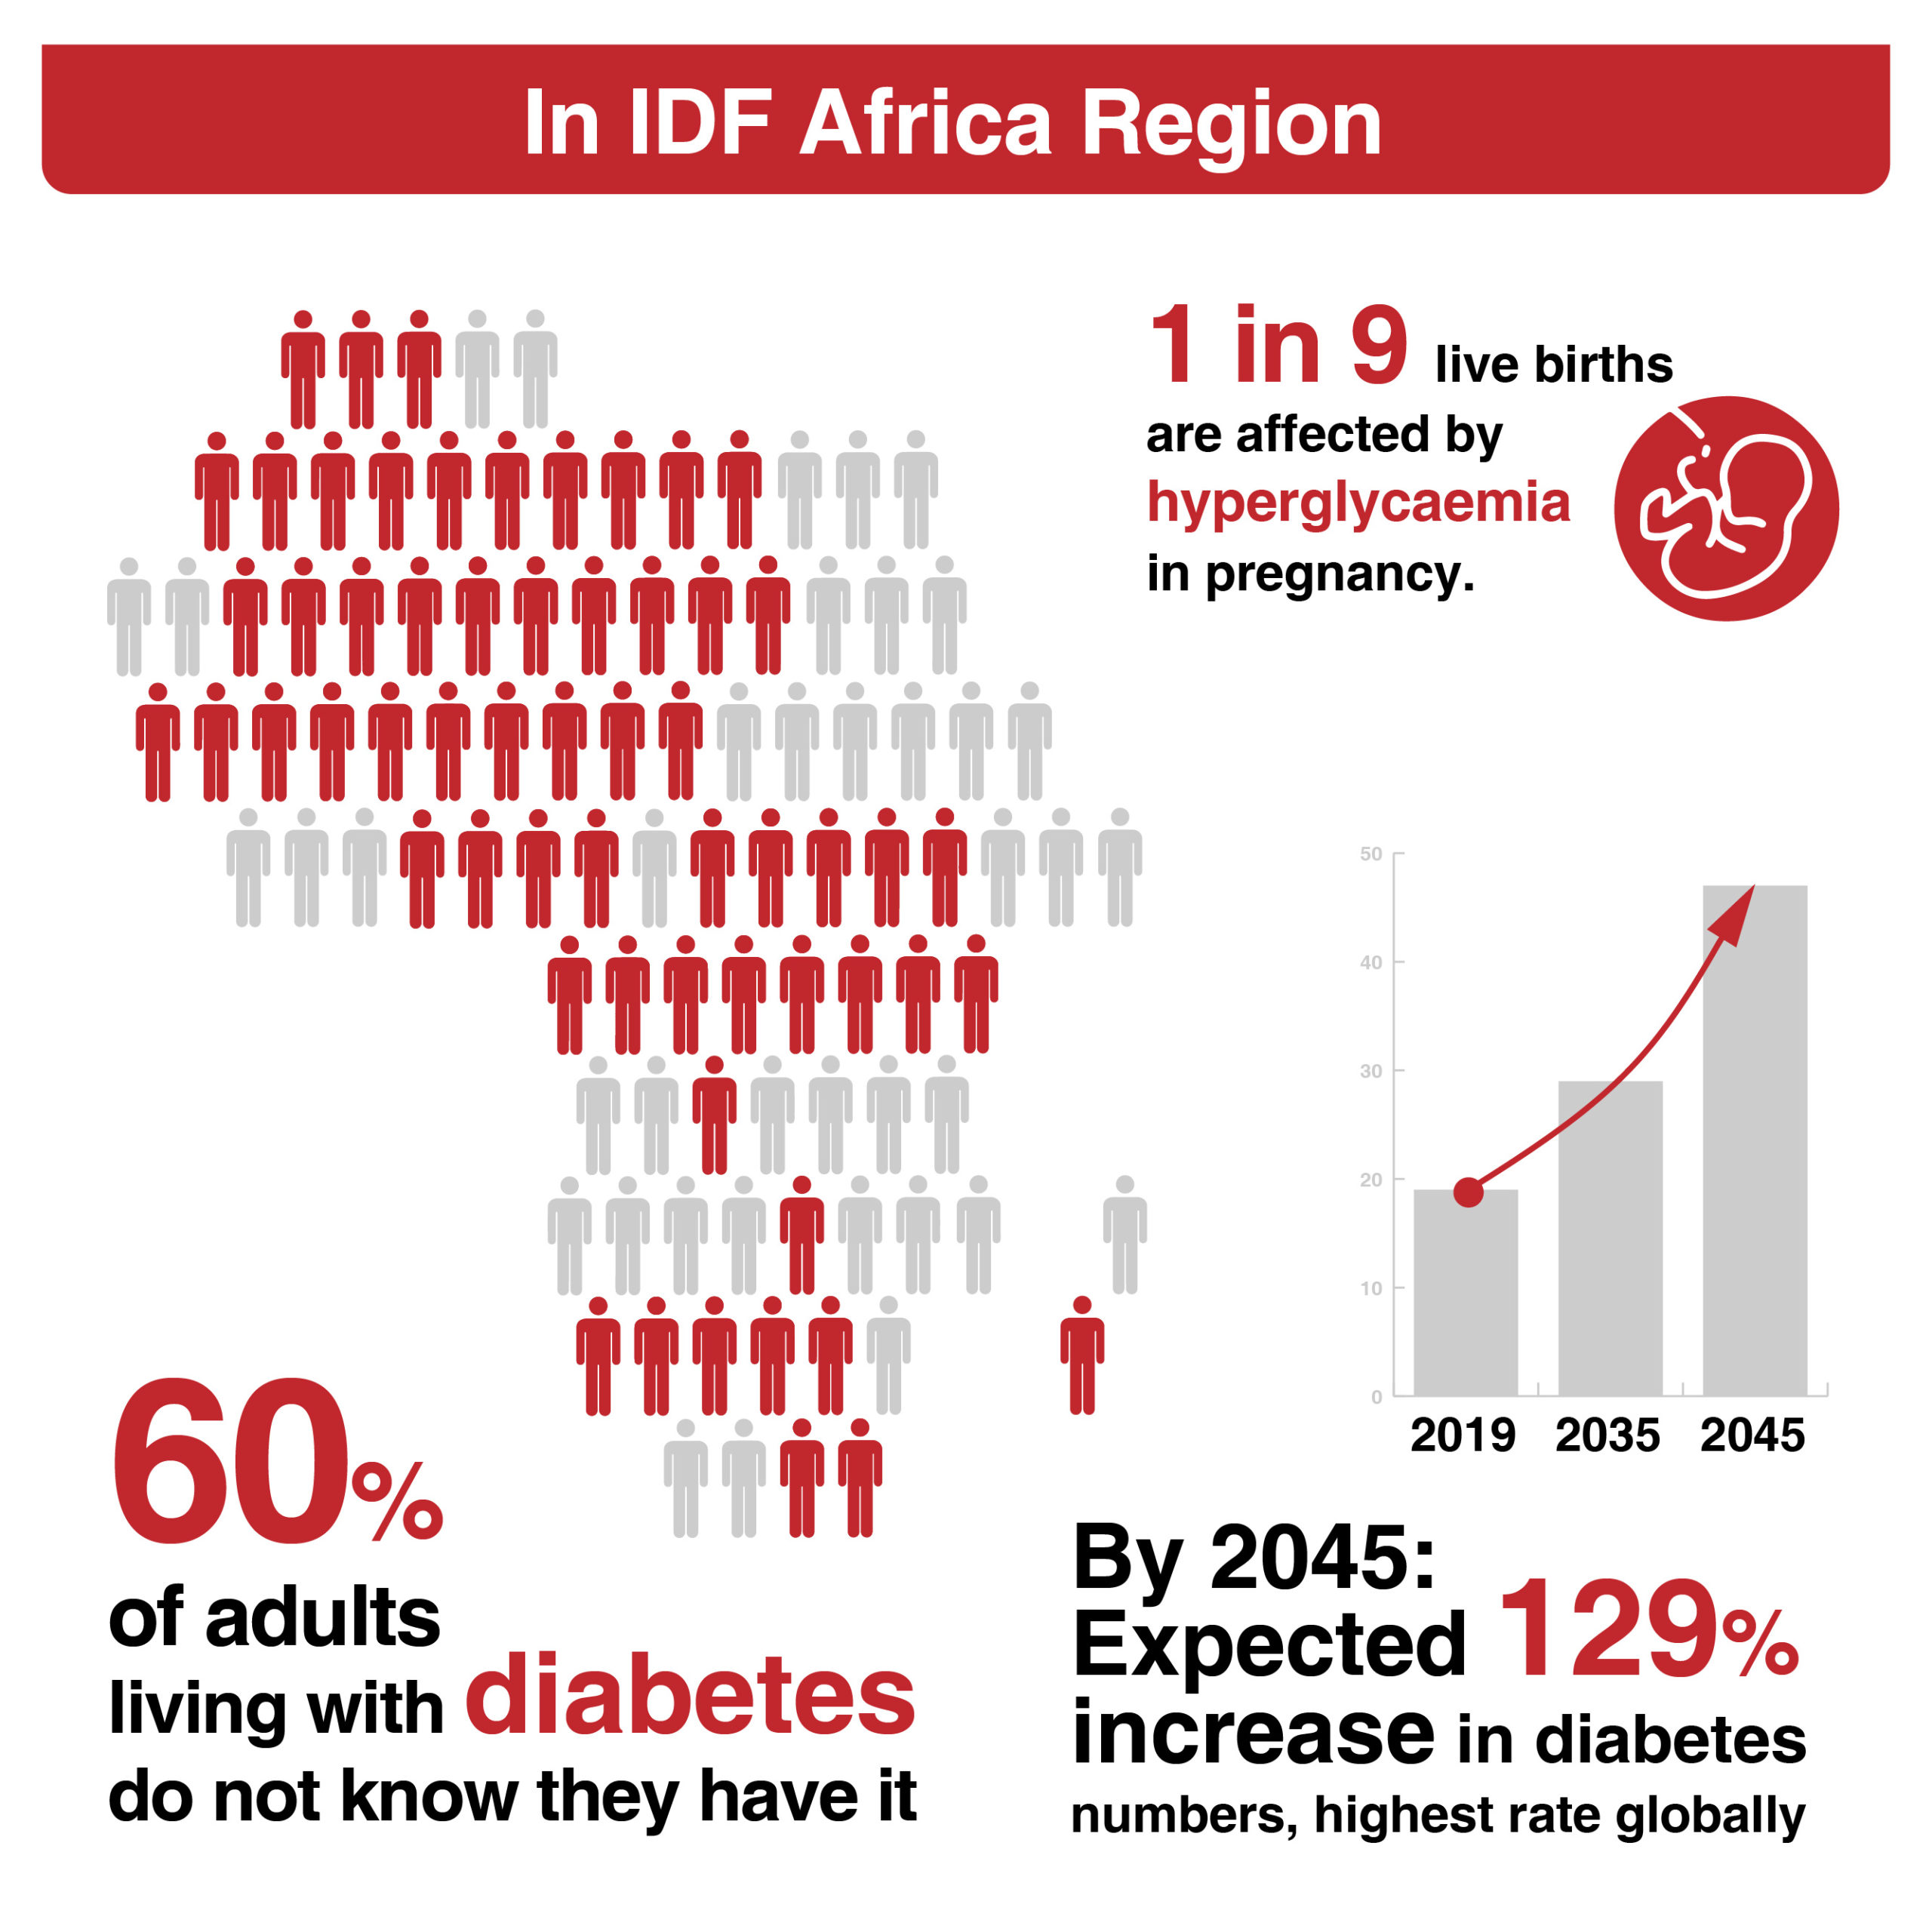 Diabetes Prevalence in Africa